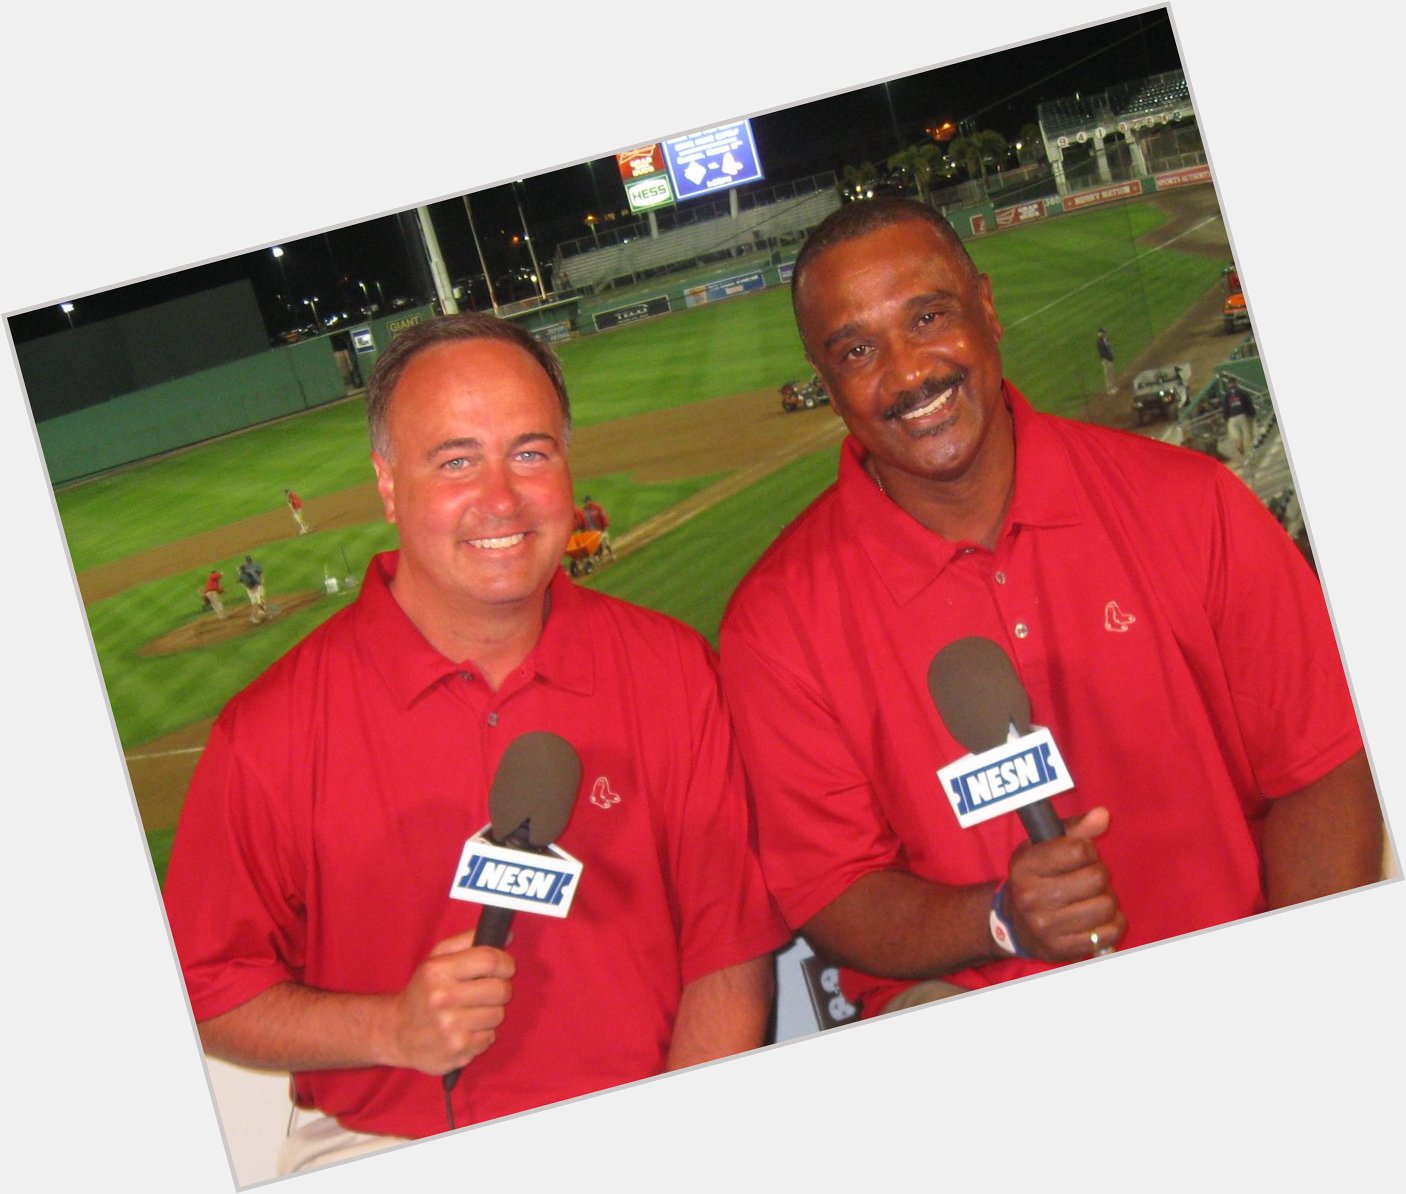 A very Happy Birthday to one of my former partners HOF Jim Rice! 